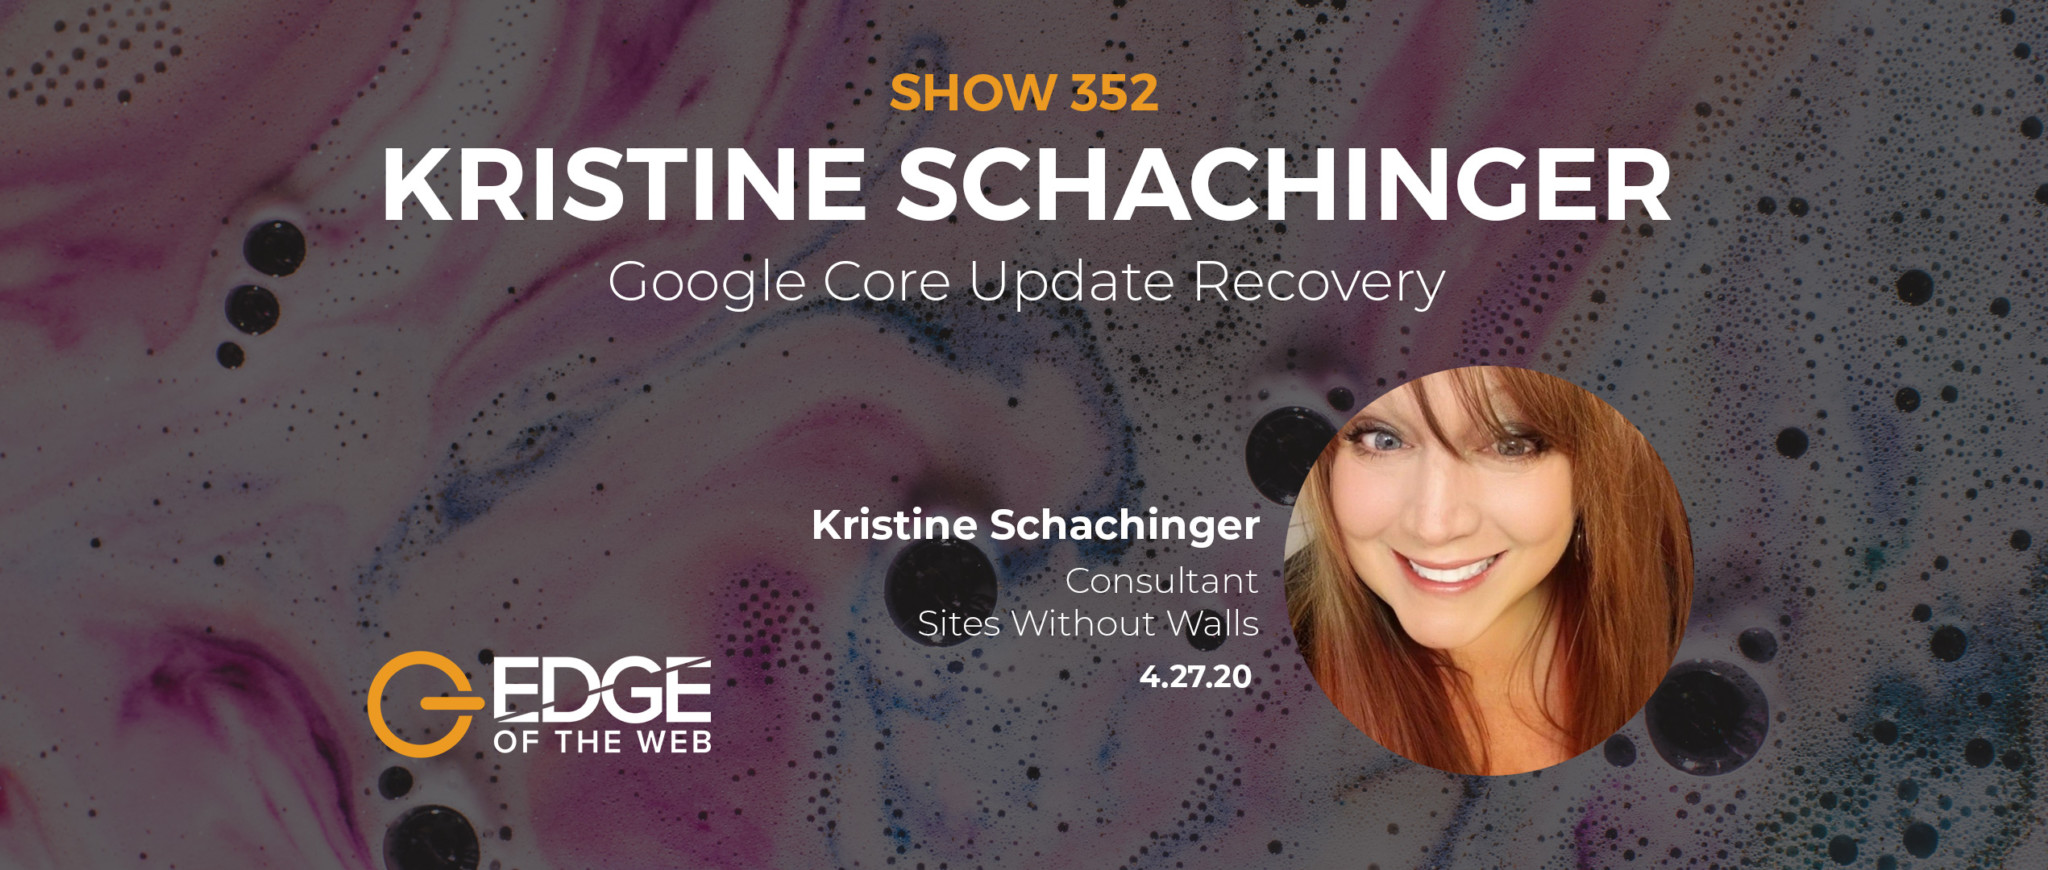 EP 352: Google Core Update Recovery with Kristine Schachinger